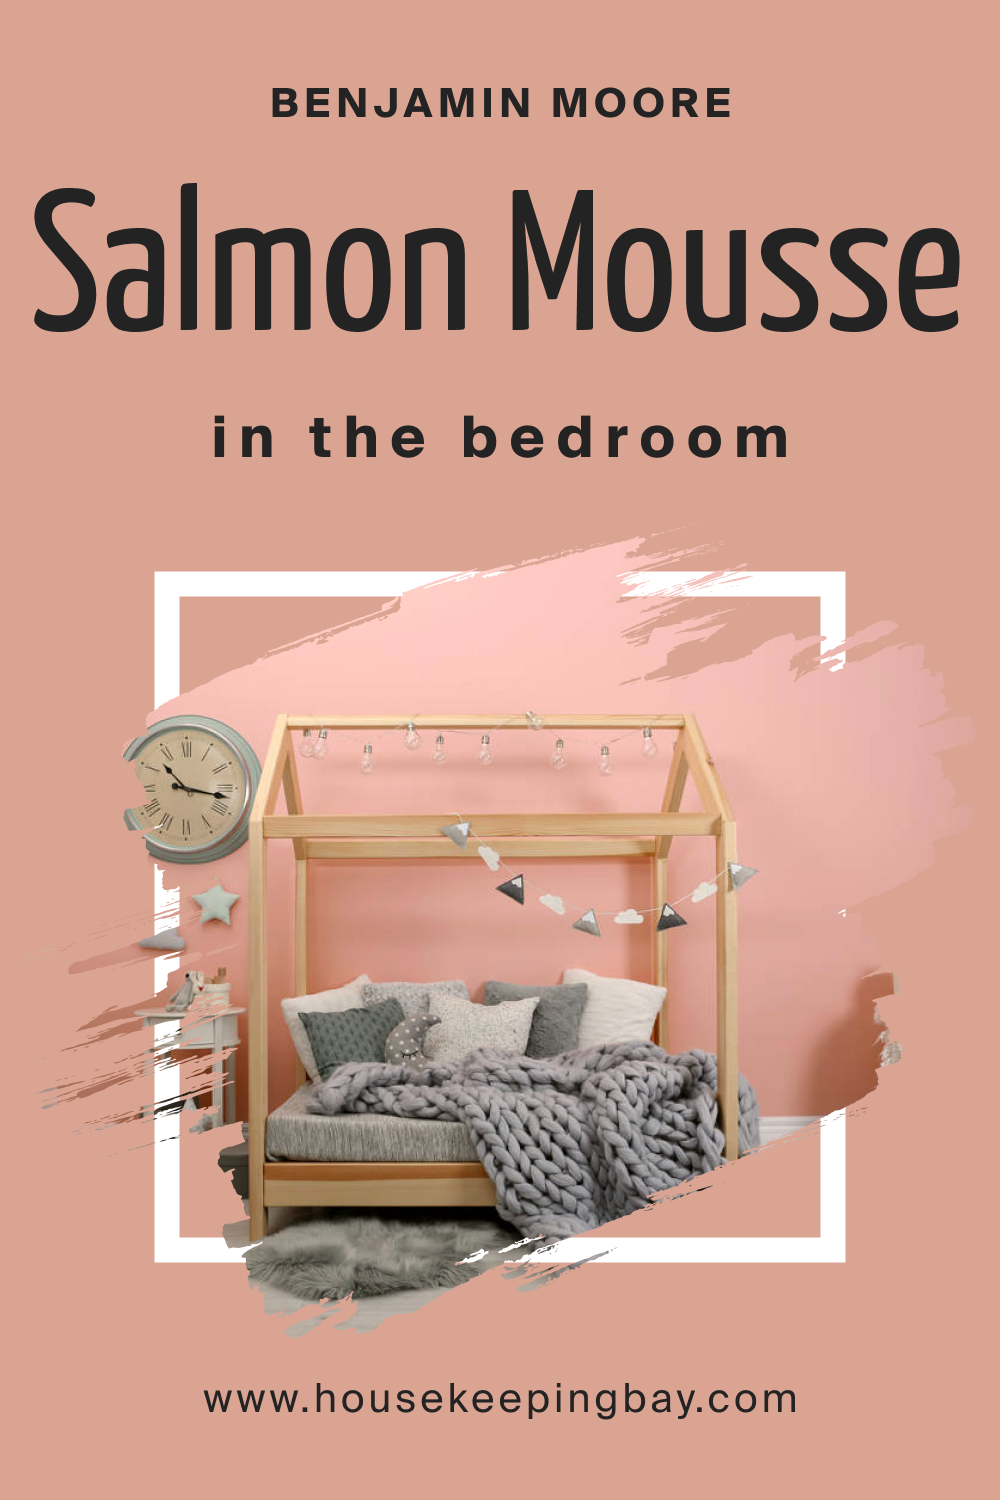 Benjamin Moore. BM Salmon Mousse 046 for the Bedroom